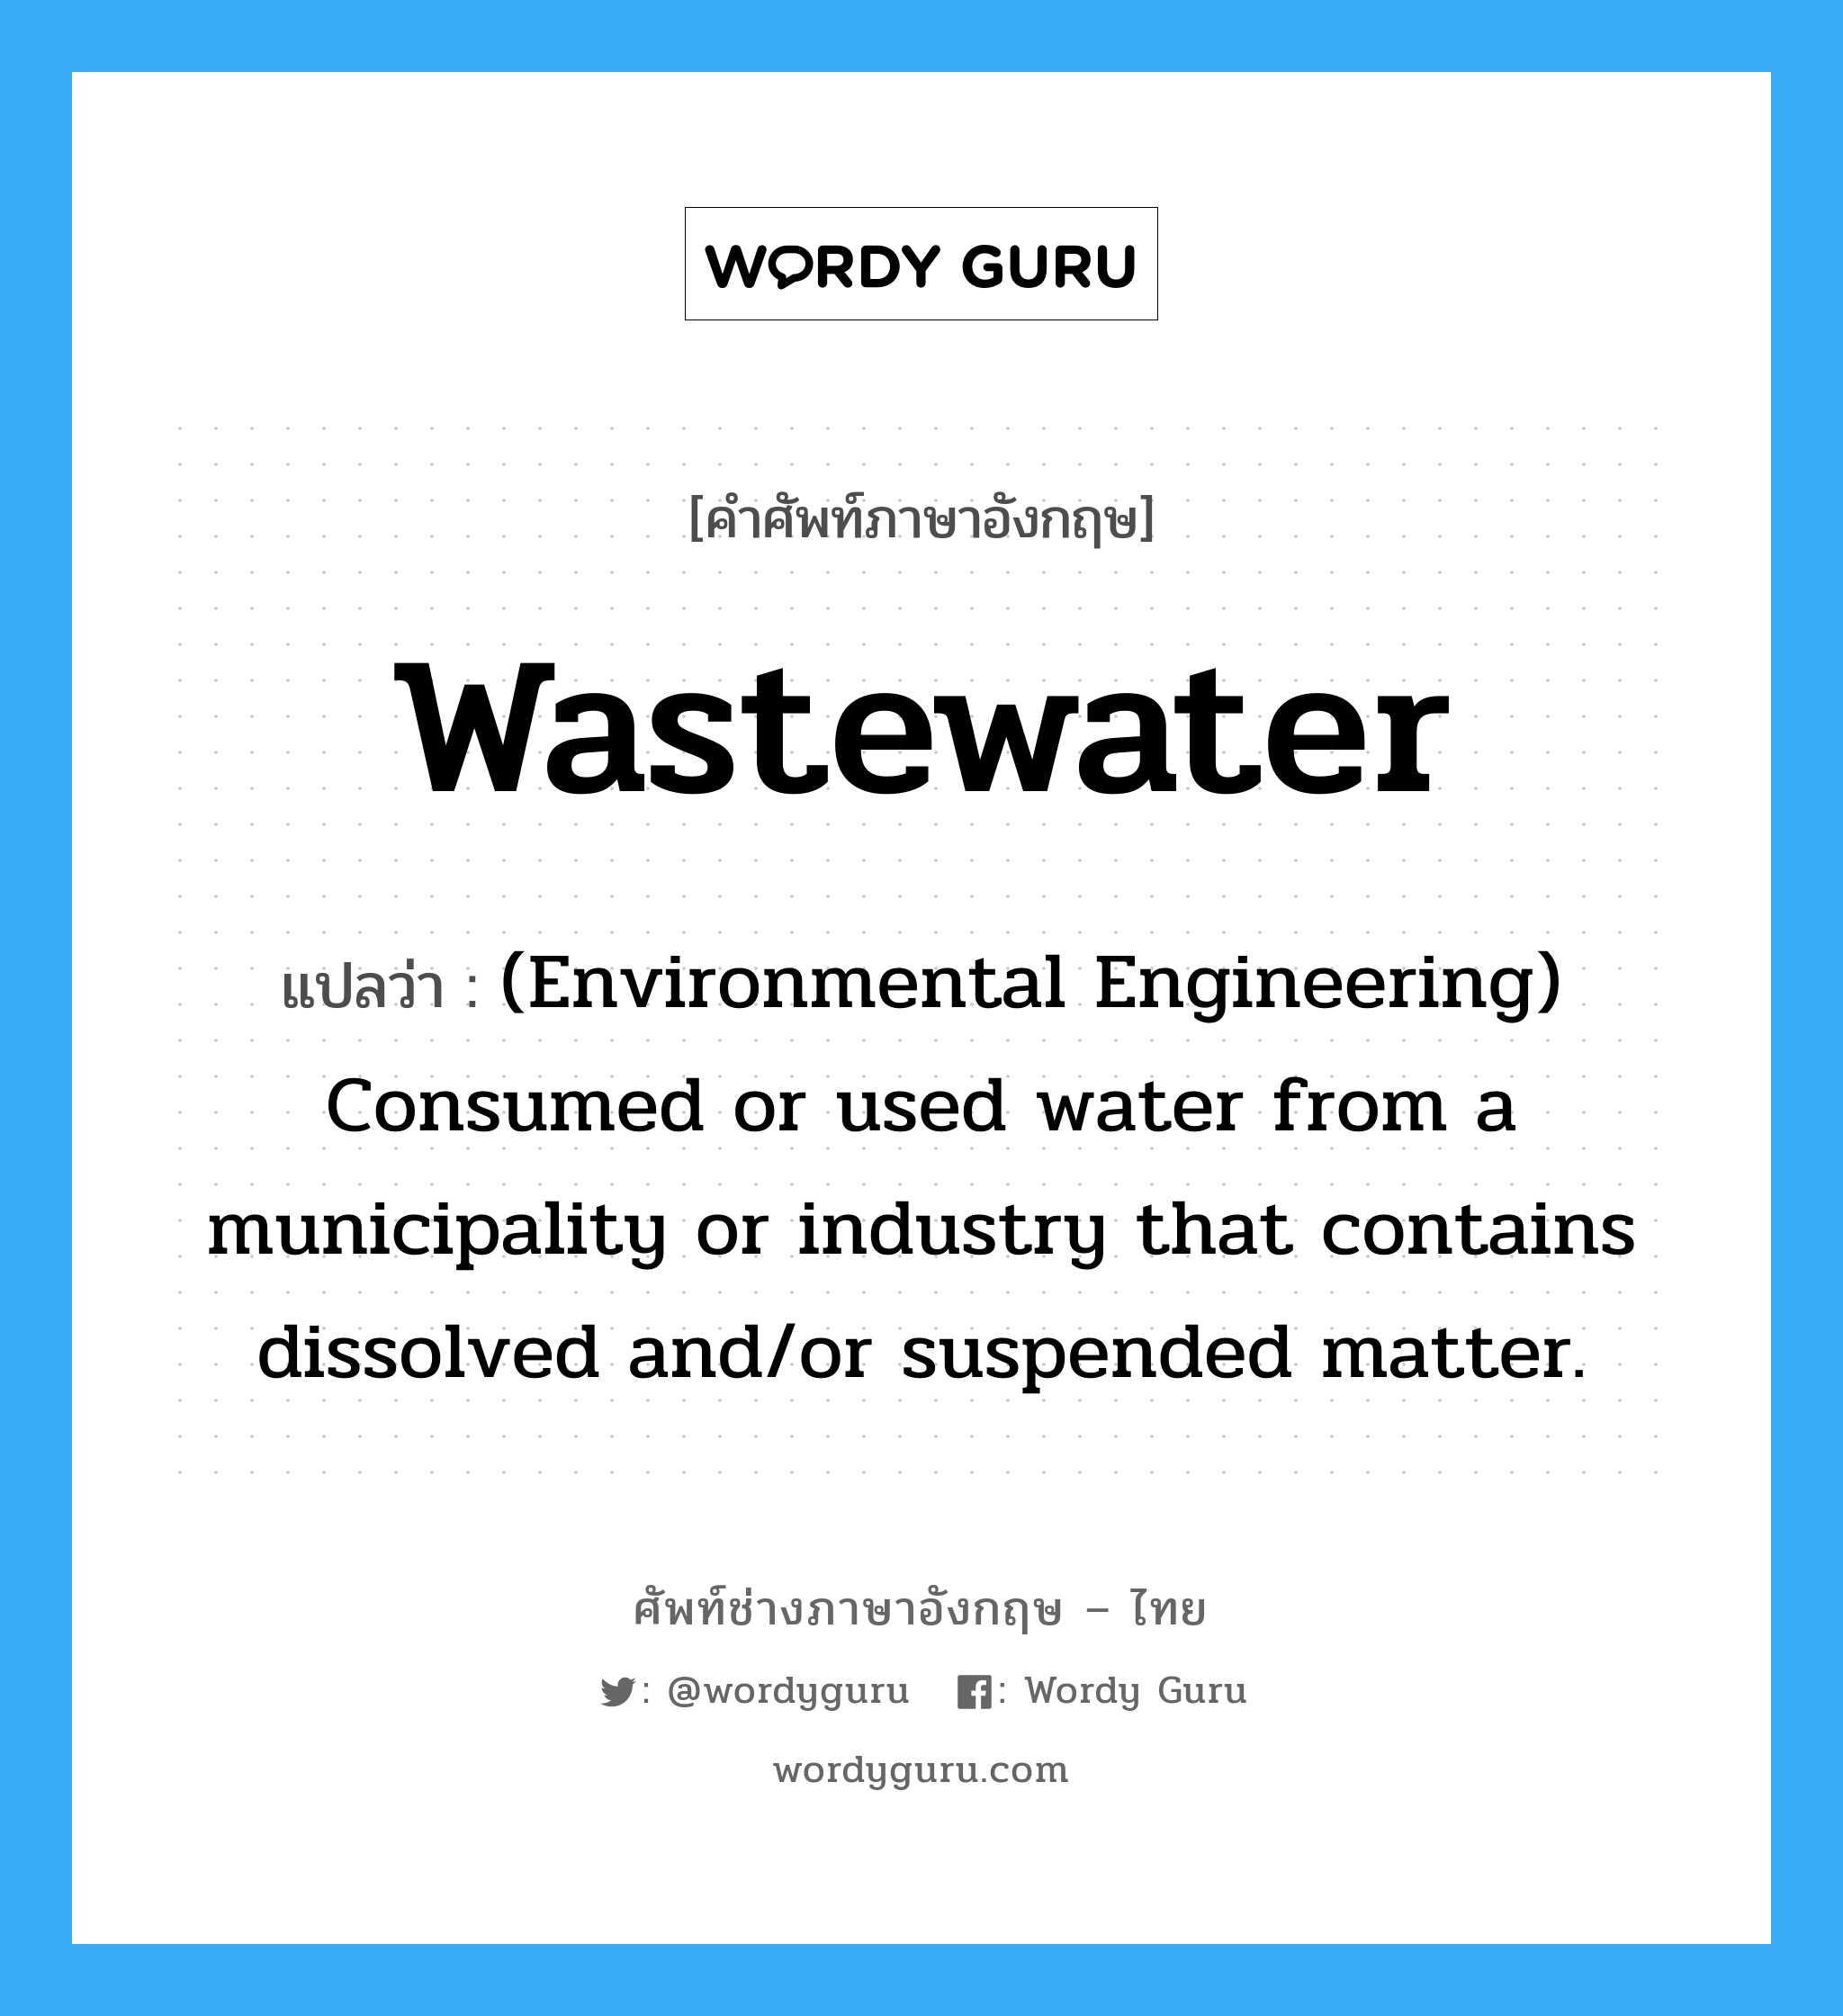 (Environmental Engineering) Consumed or used water from a municipality or industry that contains dissolved and/or suspended matter. ภาษาอังกฤษ?, คำศัพท์ช่างภาษาอังกฤษ - ไทย (Environmental Engineering) Consumed or used water from a municipality or industry that contains dissolved and/or suspended matter. คำศัพท์ภาษาอังกฤษ (Environmental Engineering) Consumed or used water from a municipality or industry that contains dissolved and/or suspended matter. แปลว่า Wastewater